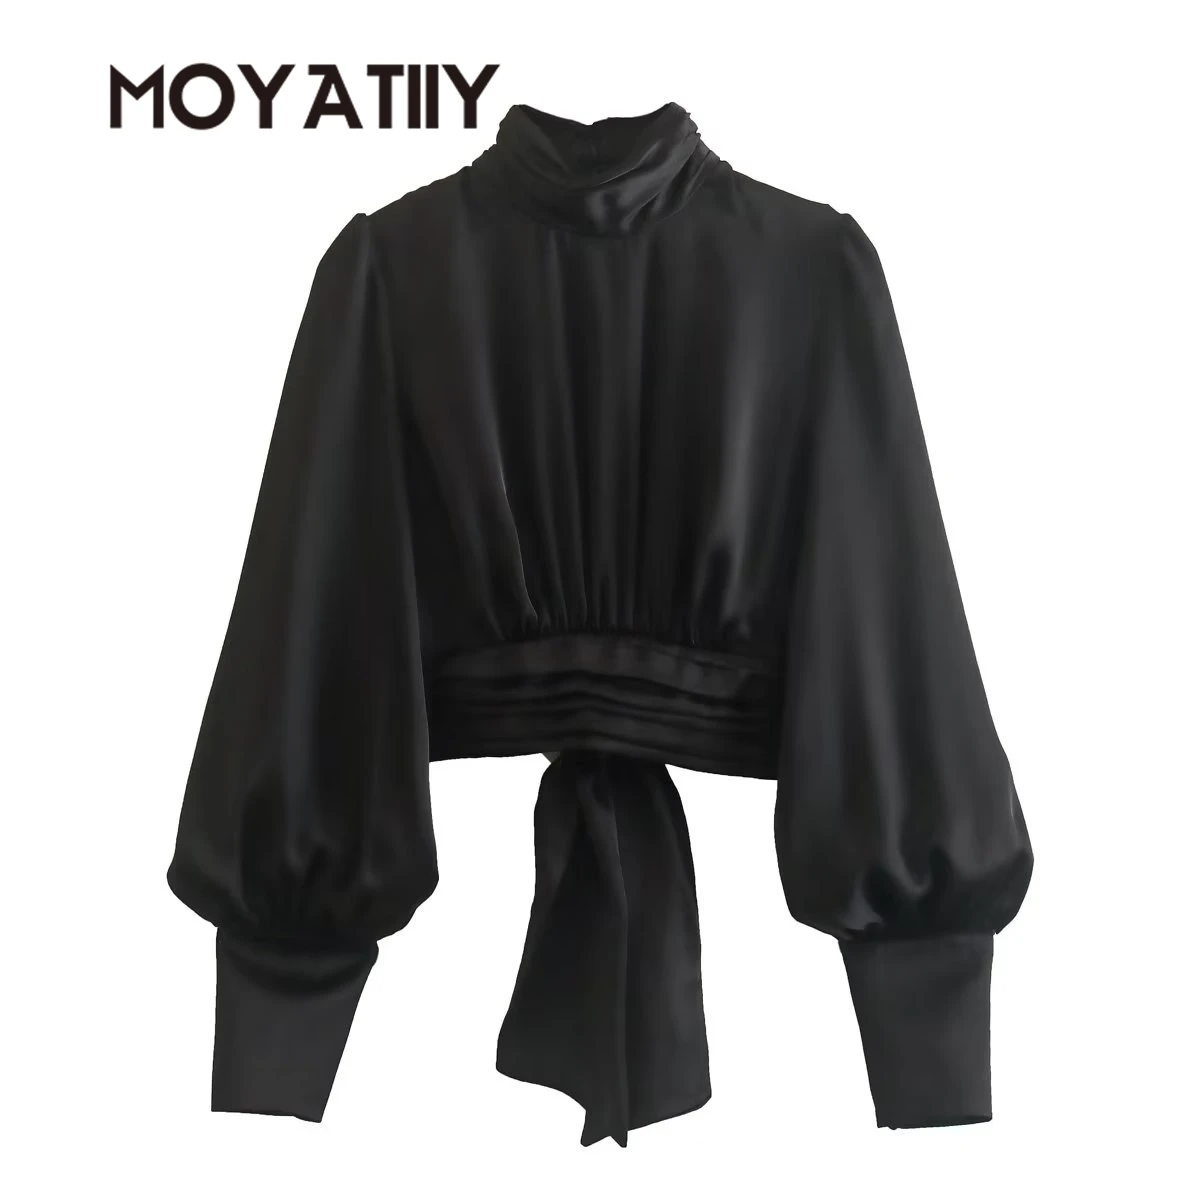 

MOYATIIY Women Black Shirts Fashion New Year Backless Satin Shirts Blouse with Bow Office Ladies Pluff Sleeve Female Tops